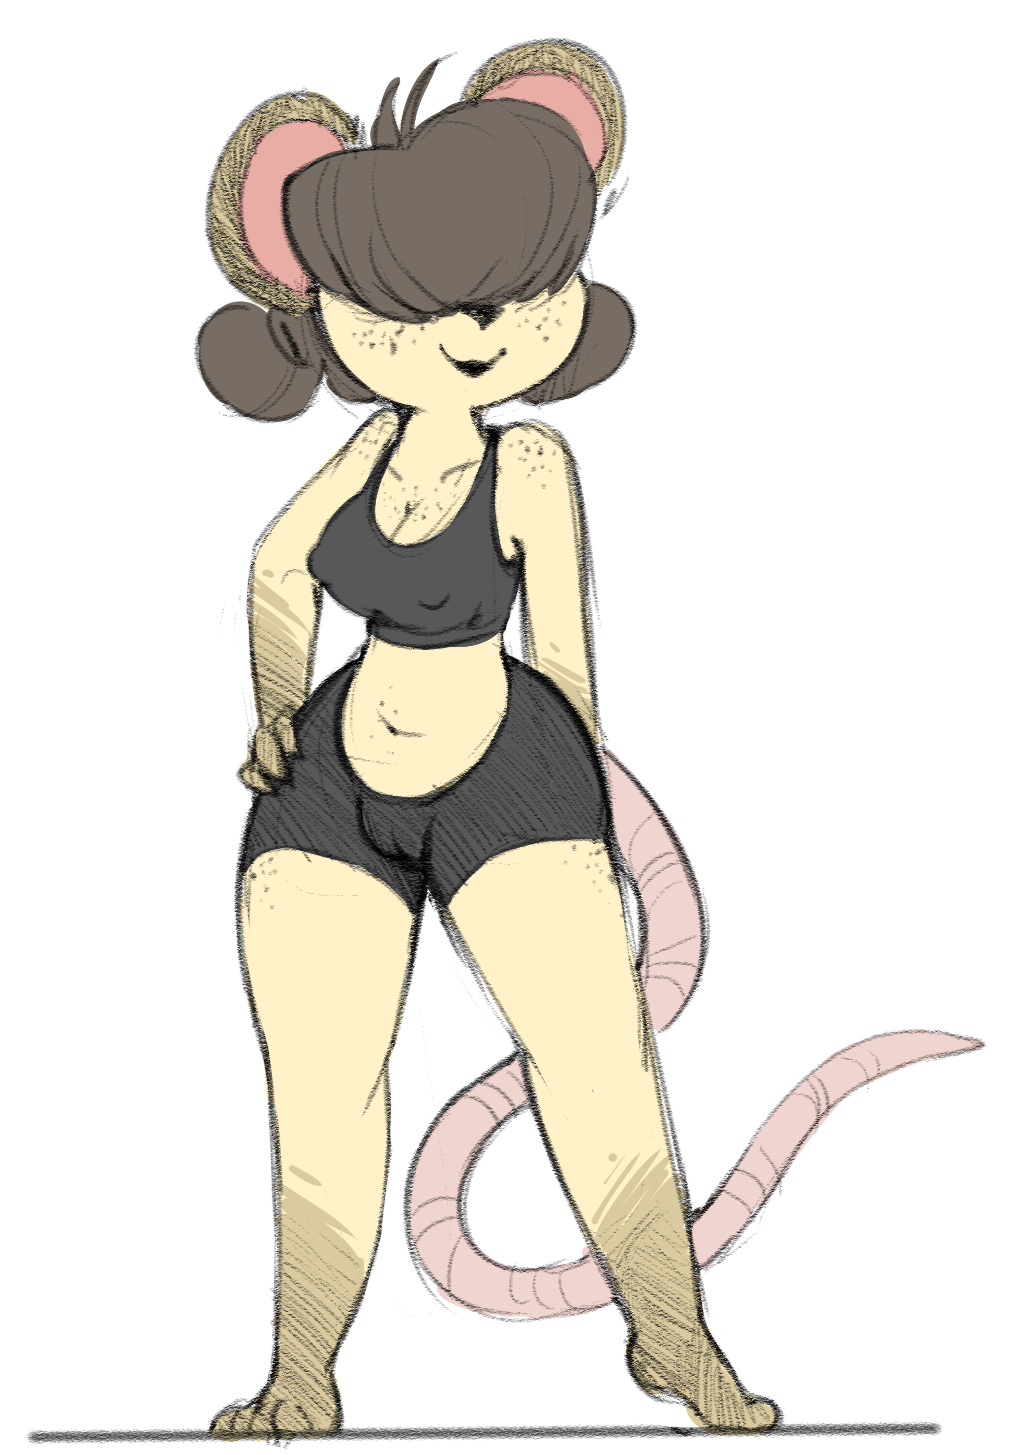 Made a mousHer name is Pepper, cause her freckles look like pepper or something